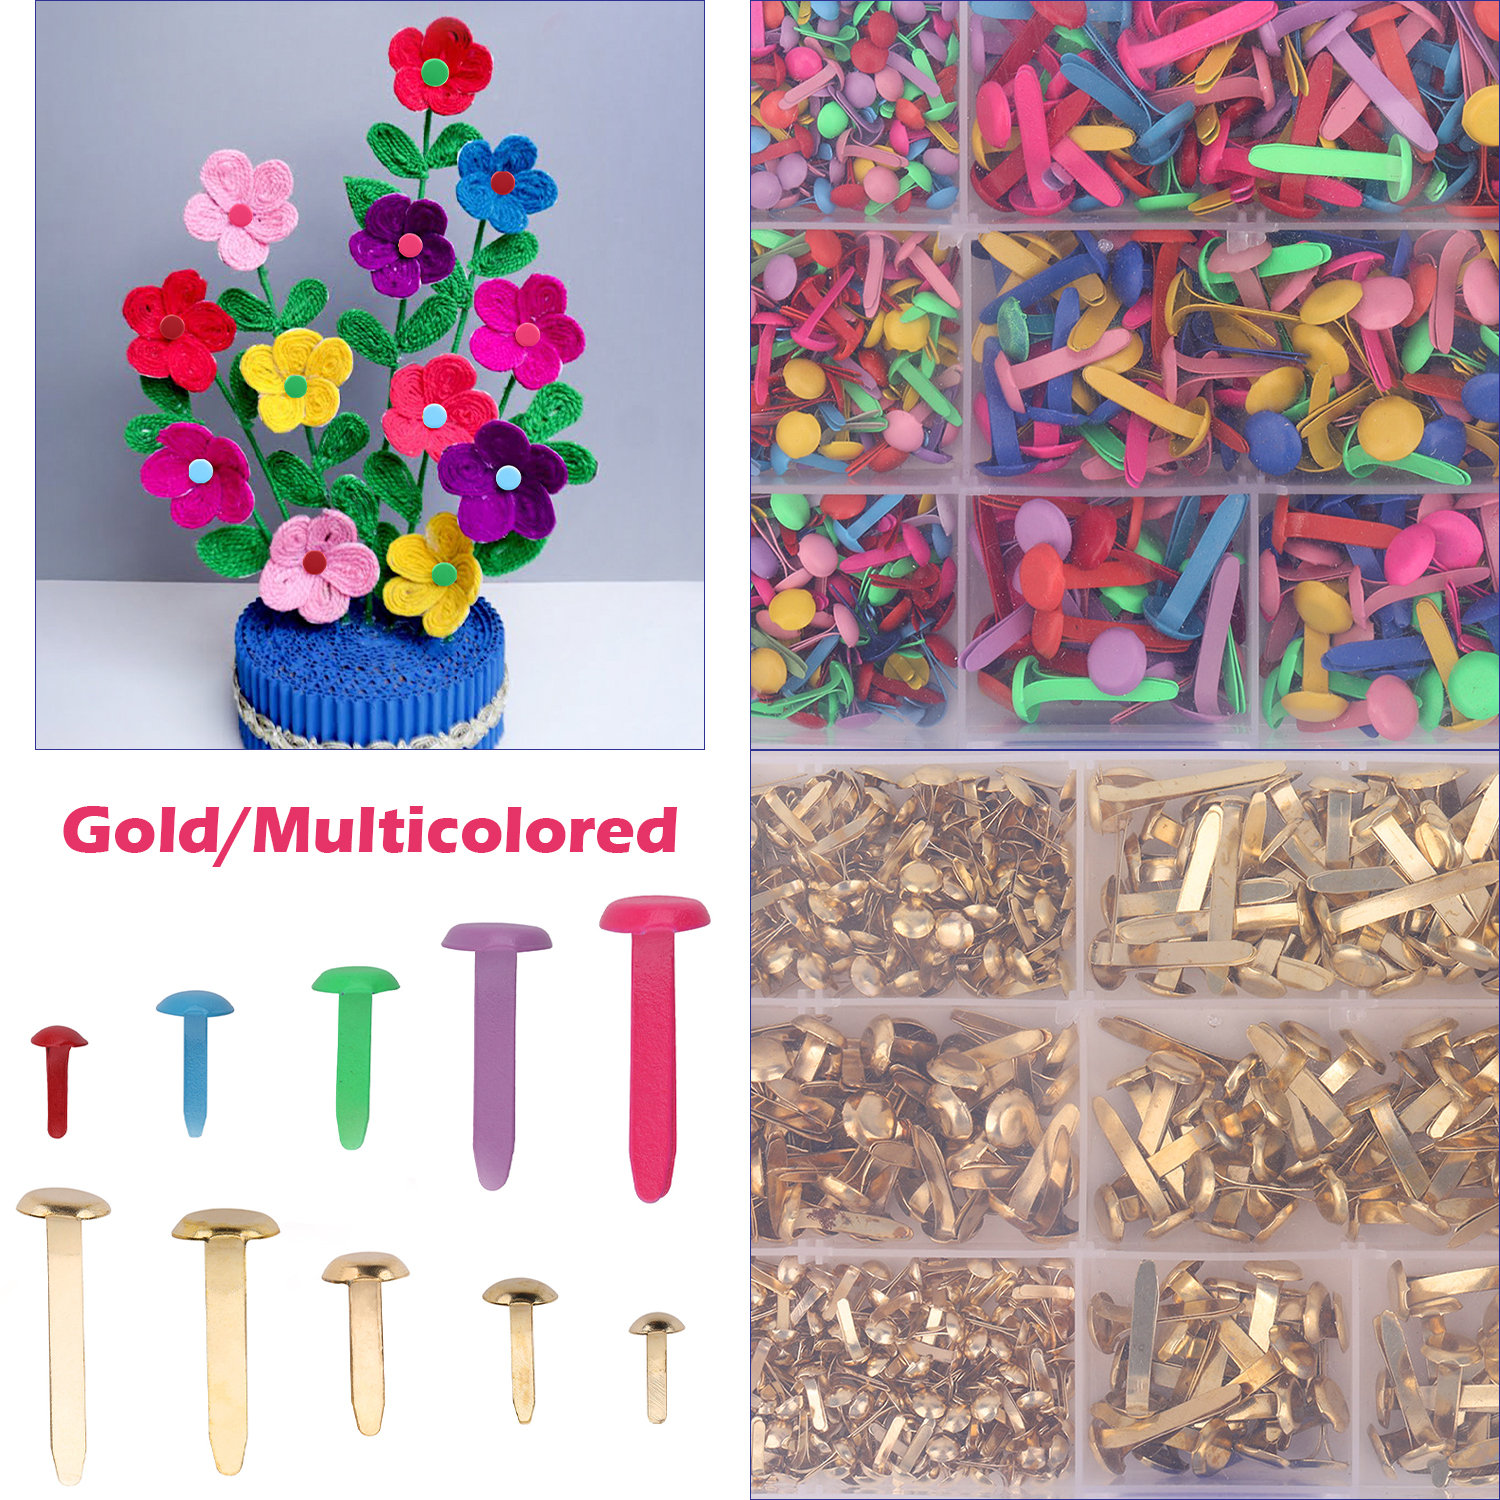 500Pcs Mini Brads for Crafts, Winspeed Colorful Metal Brads for